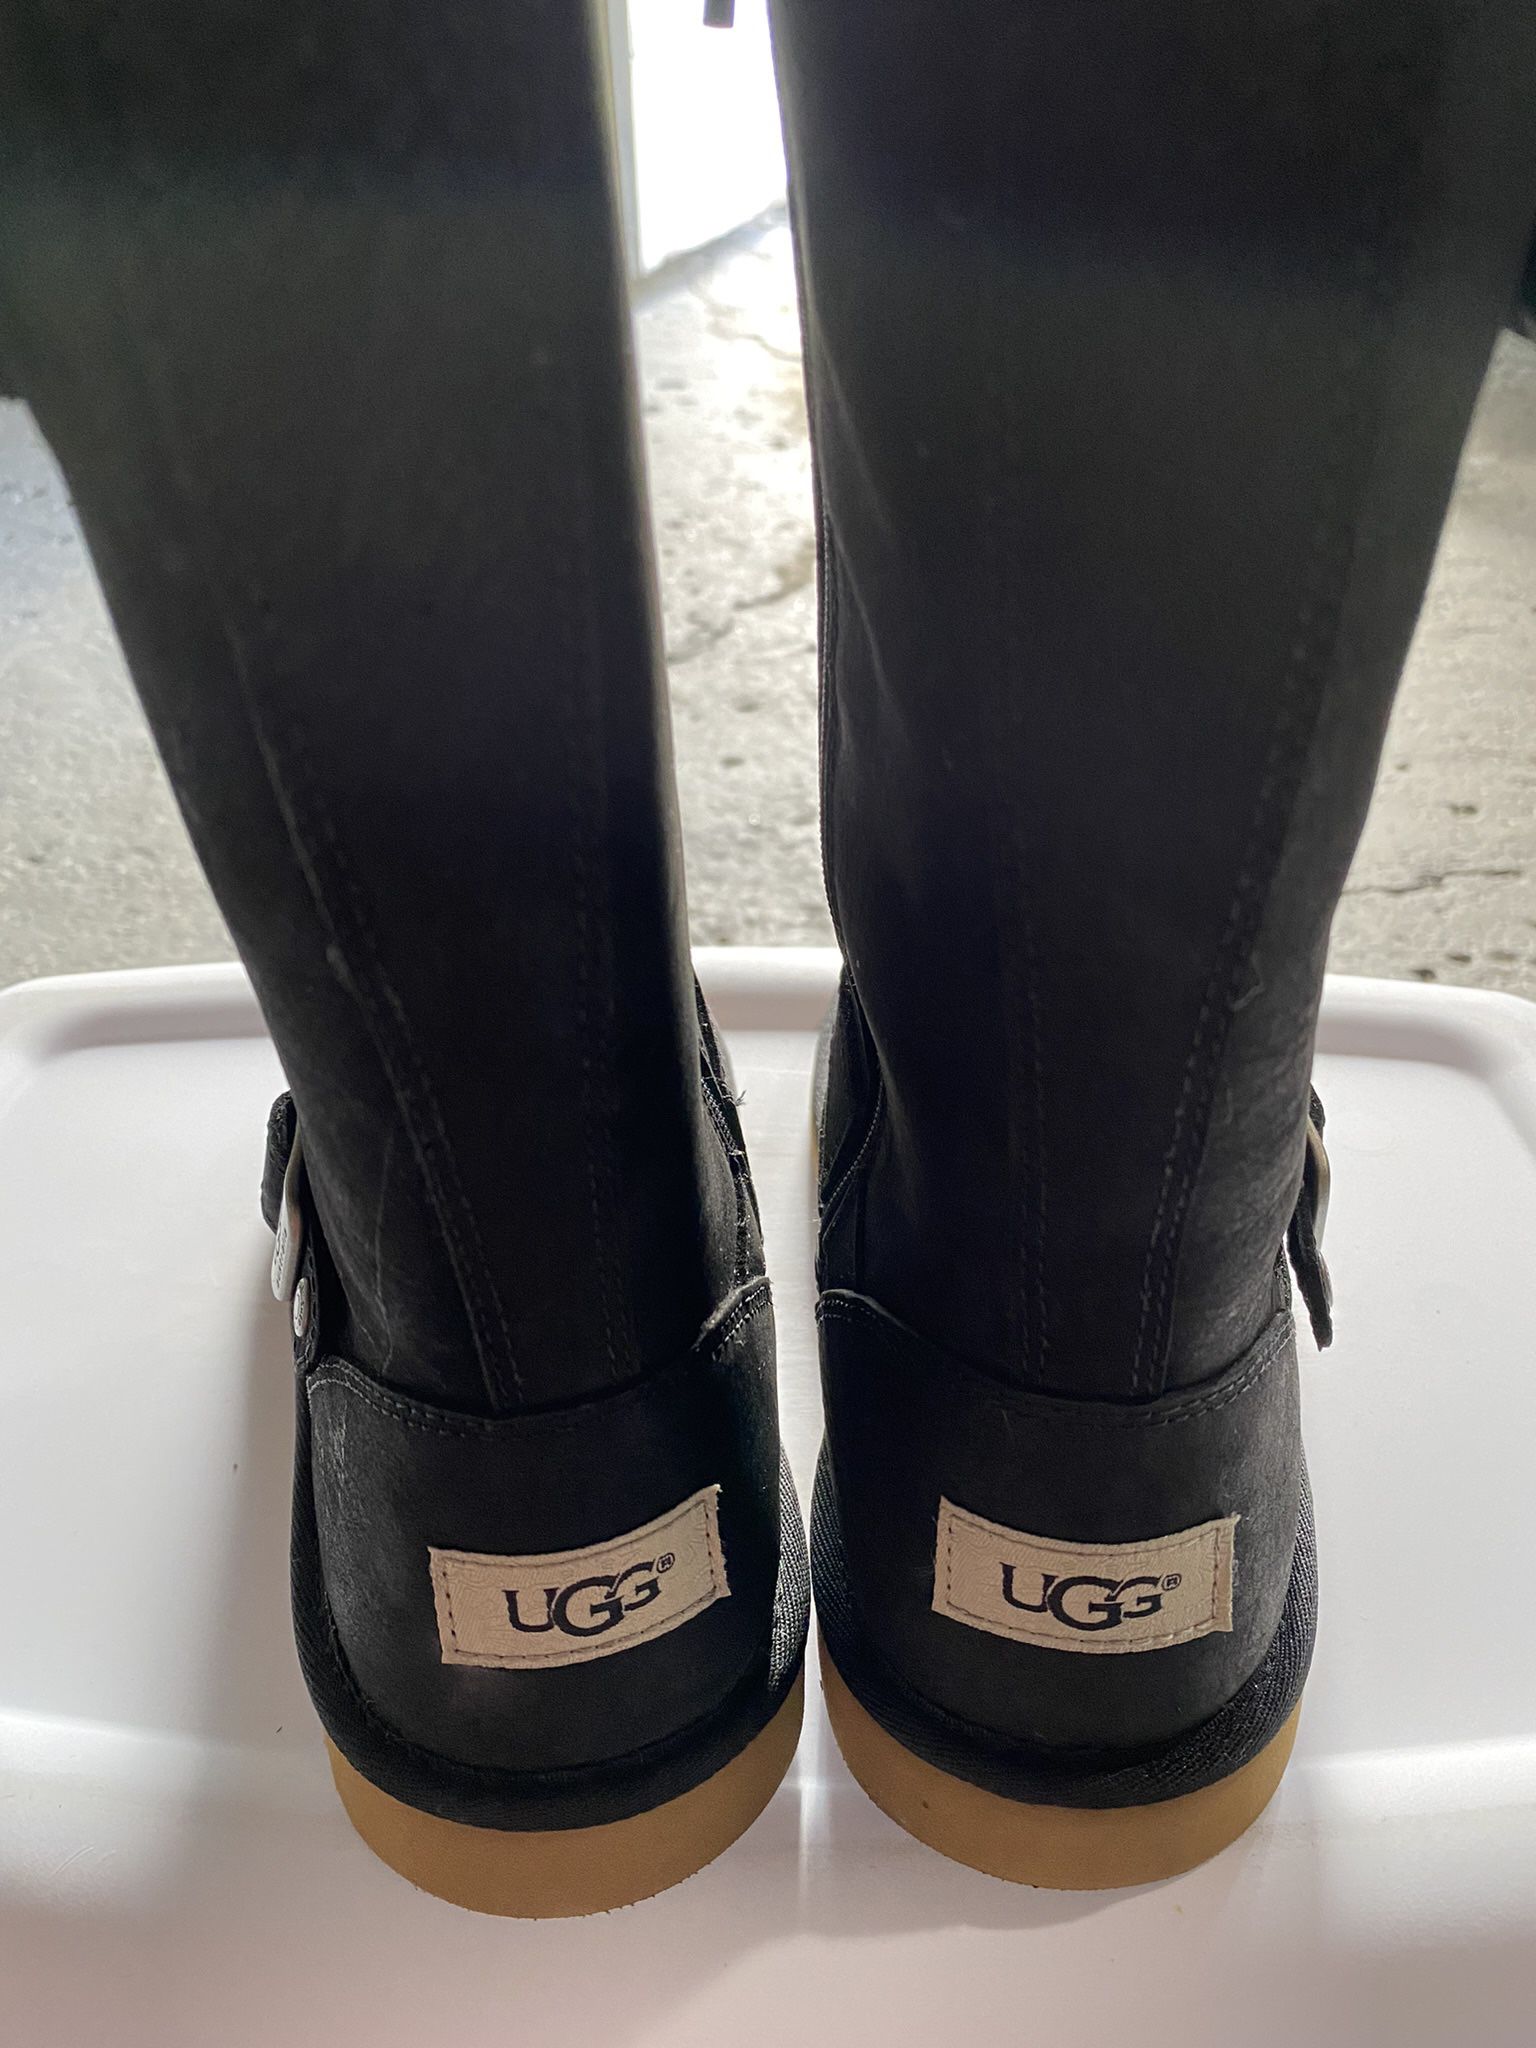 New Ugg Boots Shoes 